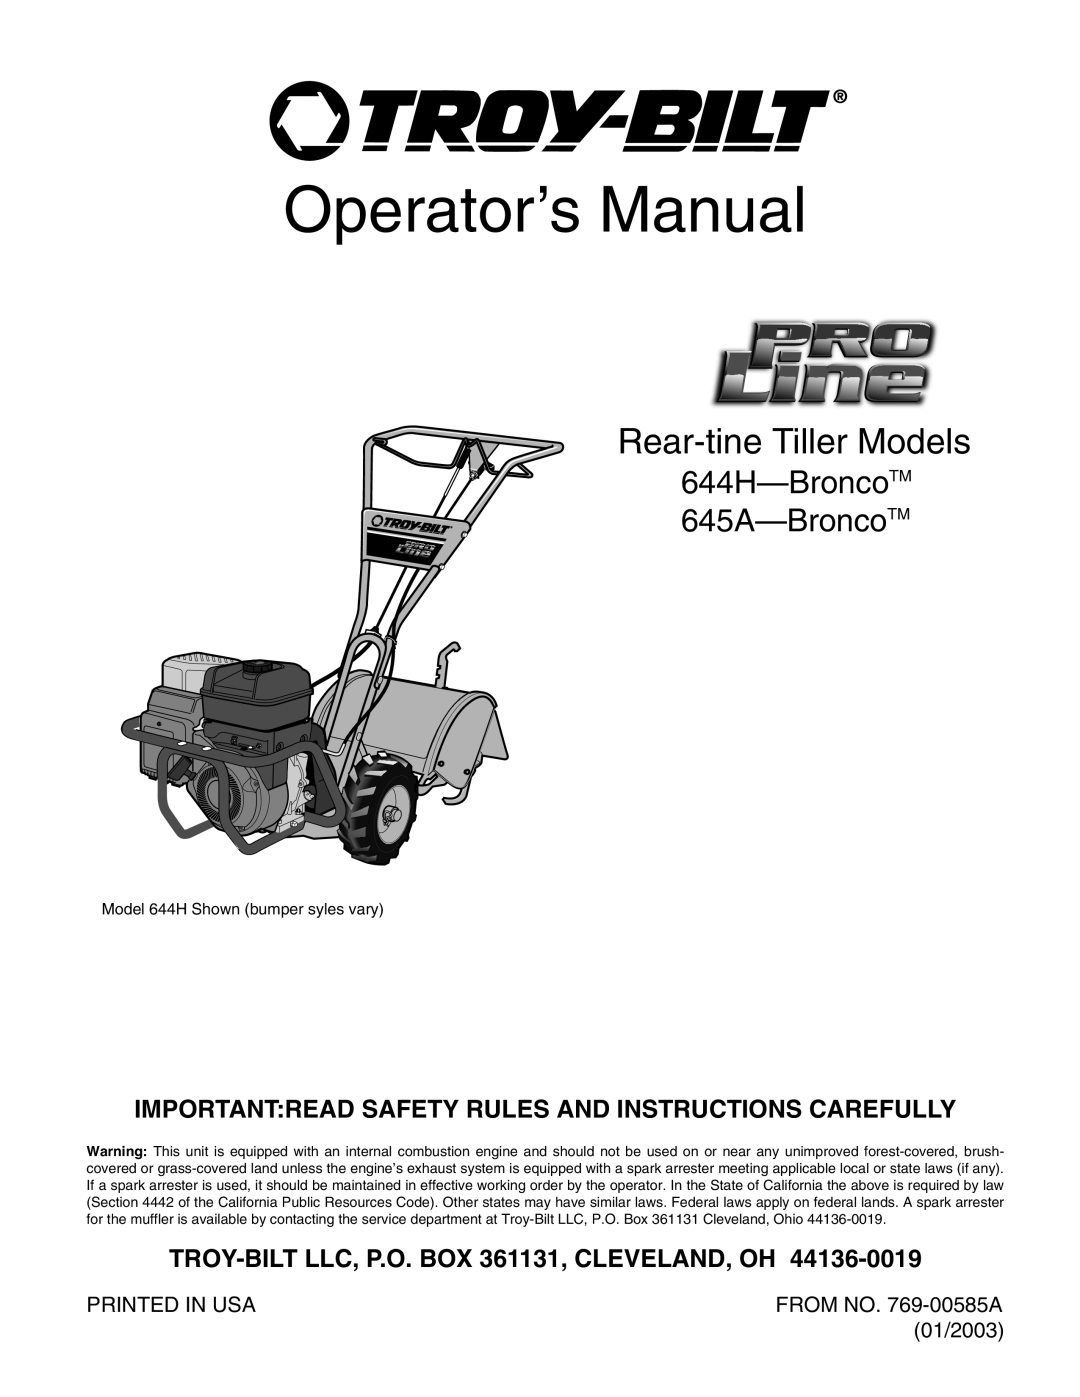 Troy-Bilt 645A-Bronco manual Importantread Safety Rules And Instructions Carefully, Operator’s Manual, FROM NO. 769-00585A 